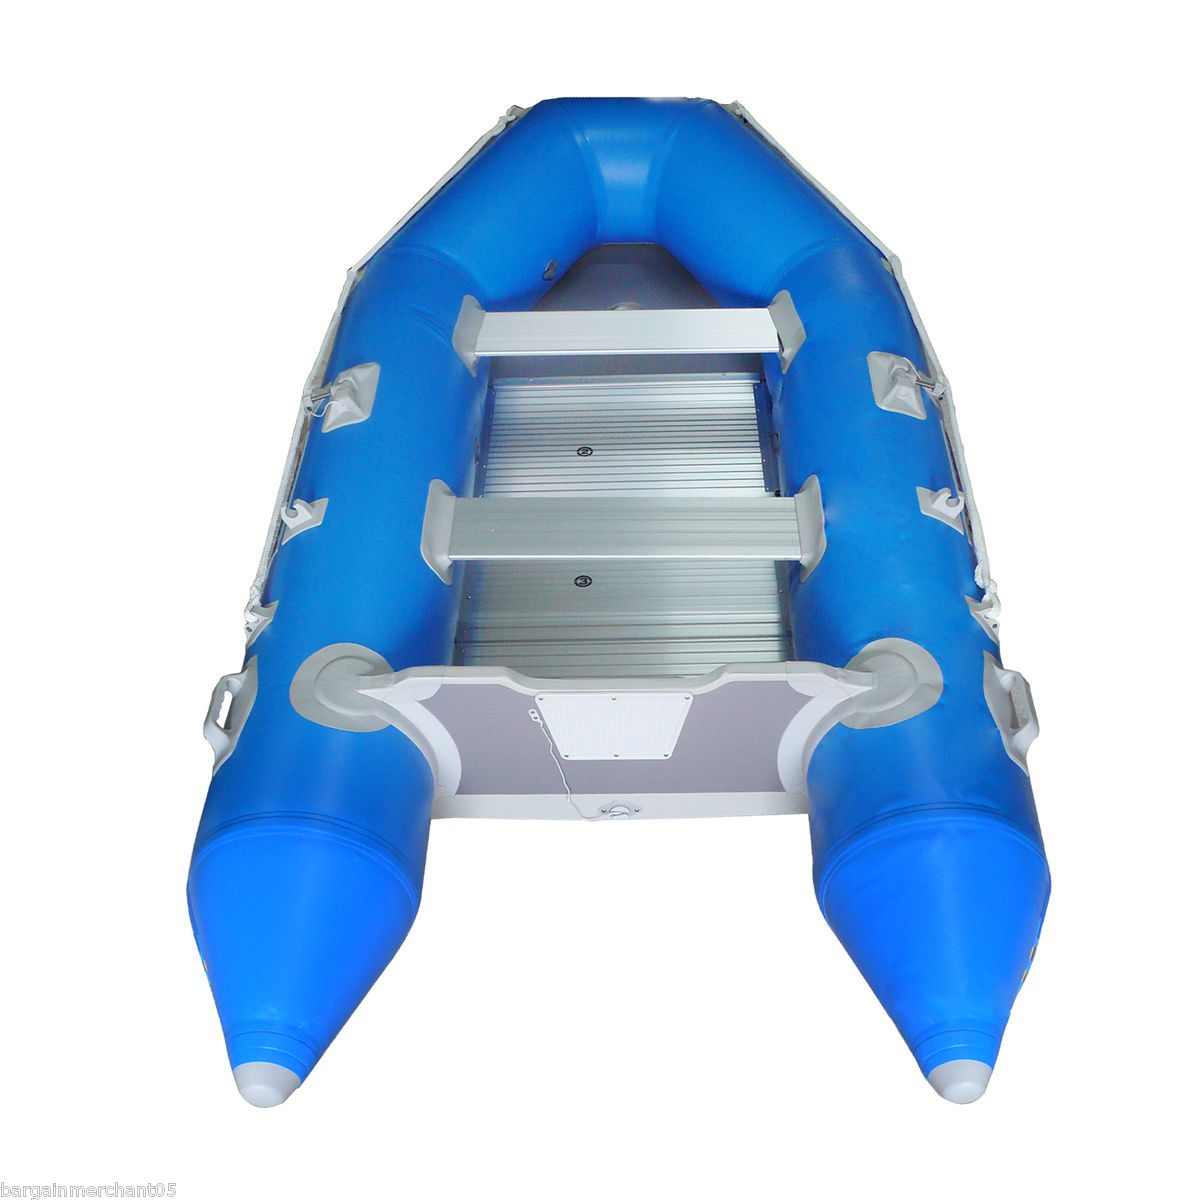   Fishing Boat PVC 0.9MM Raft Water Sports With Aluminum Floor